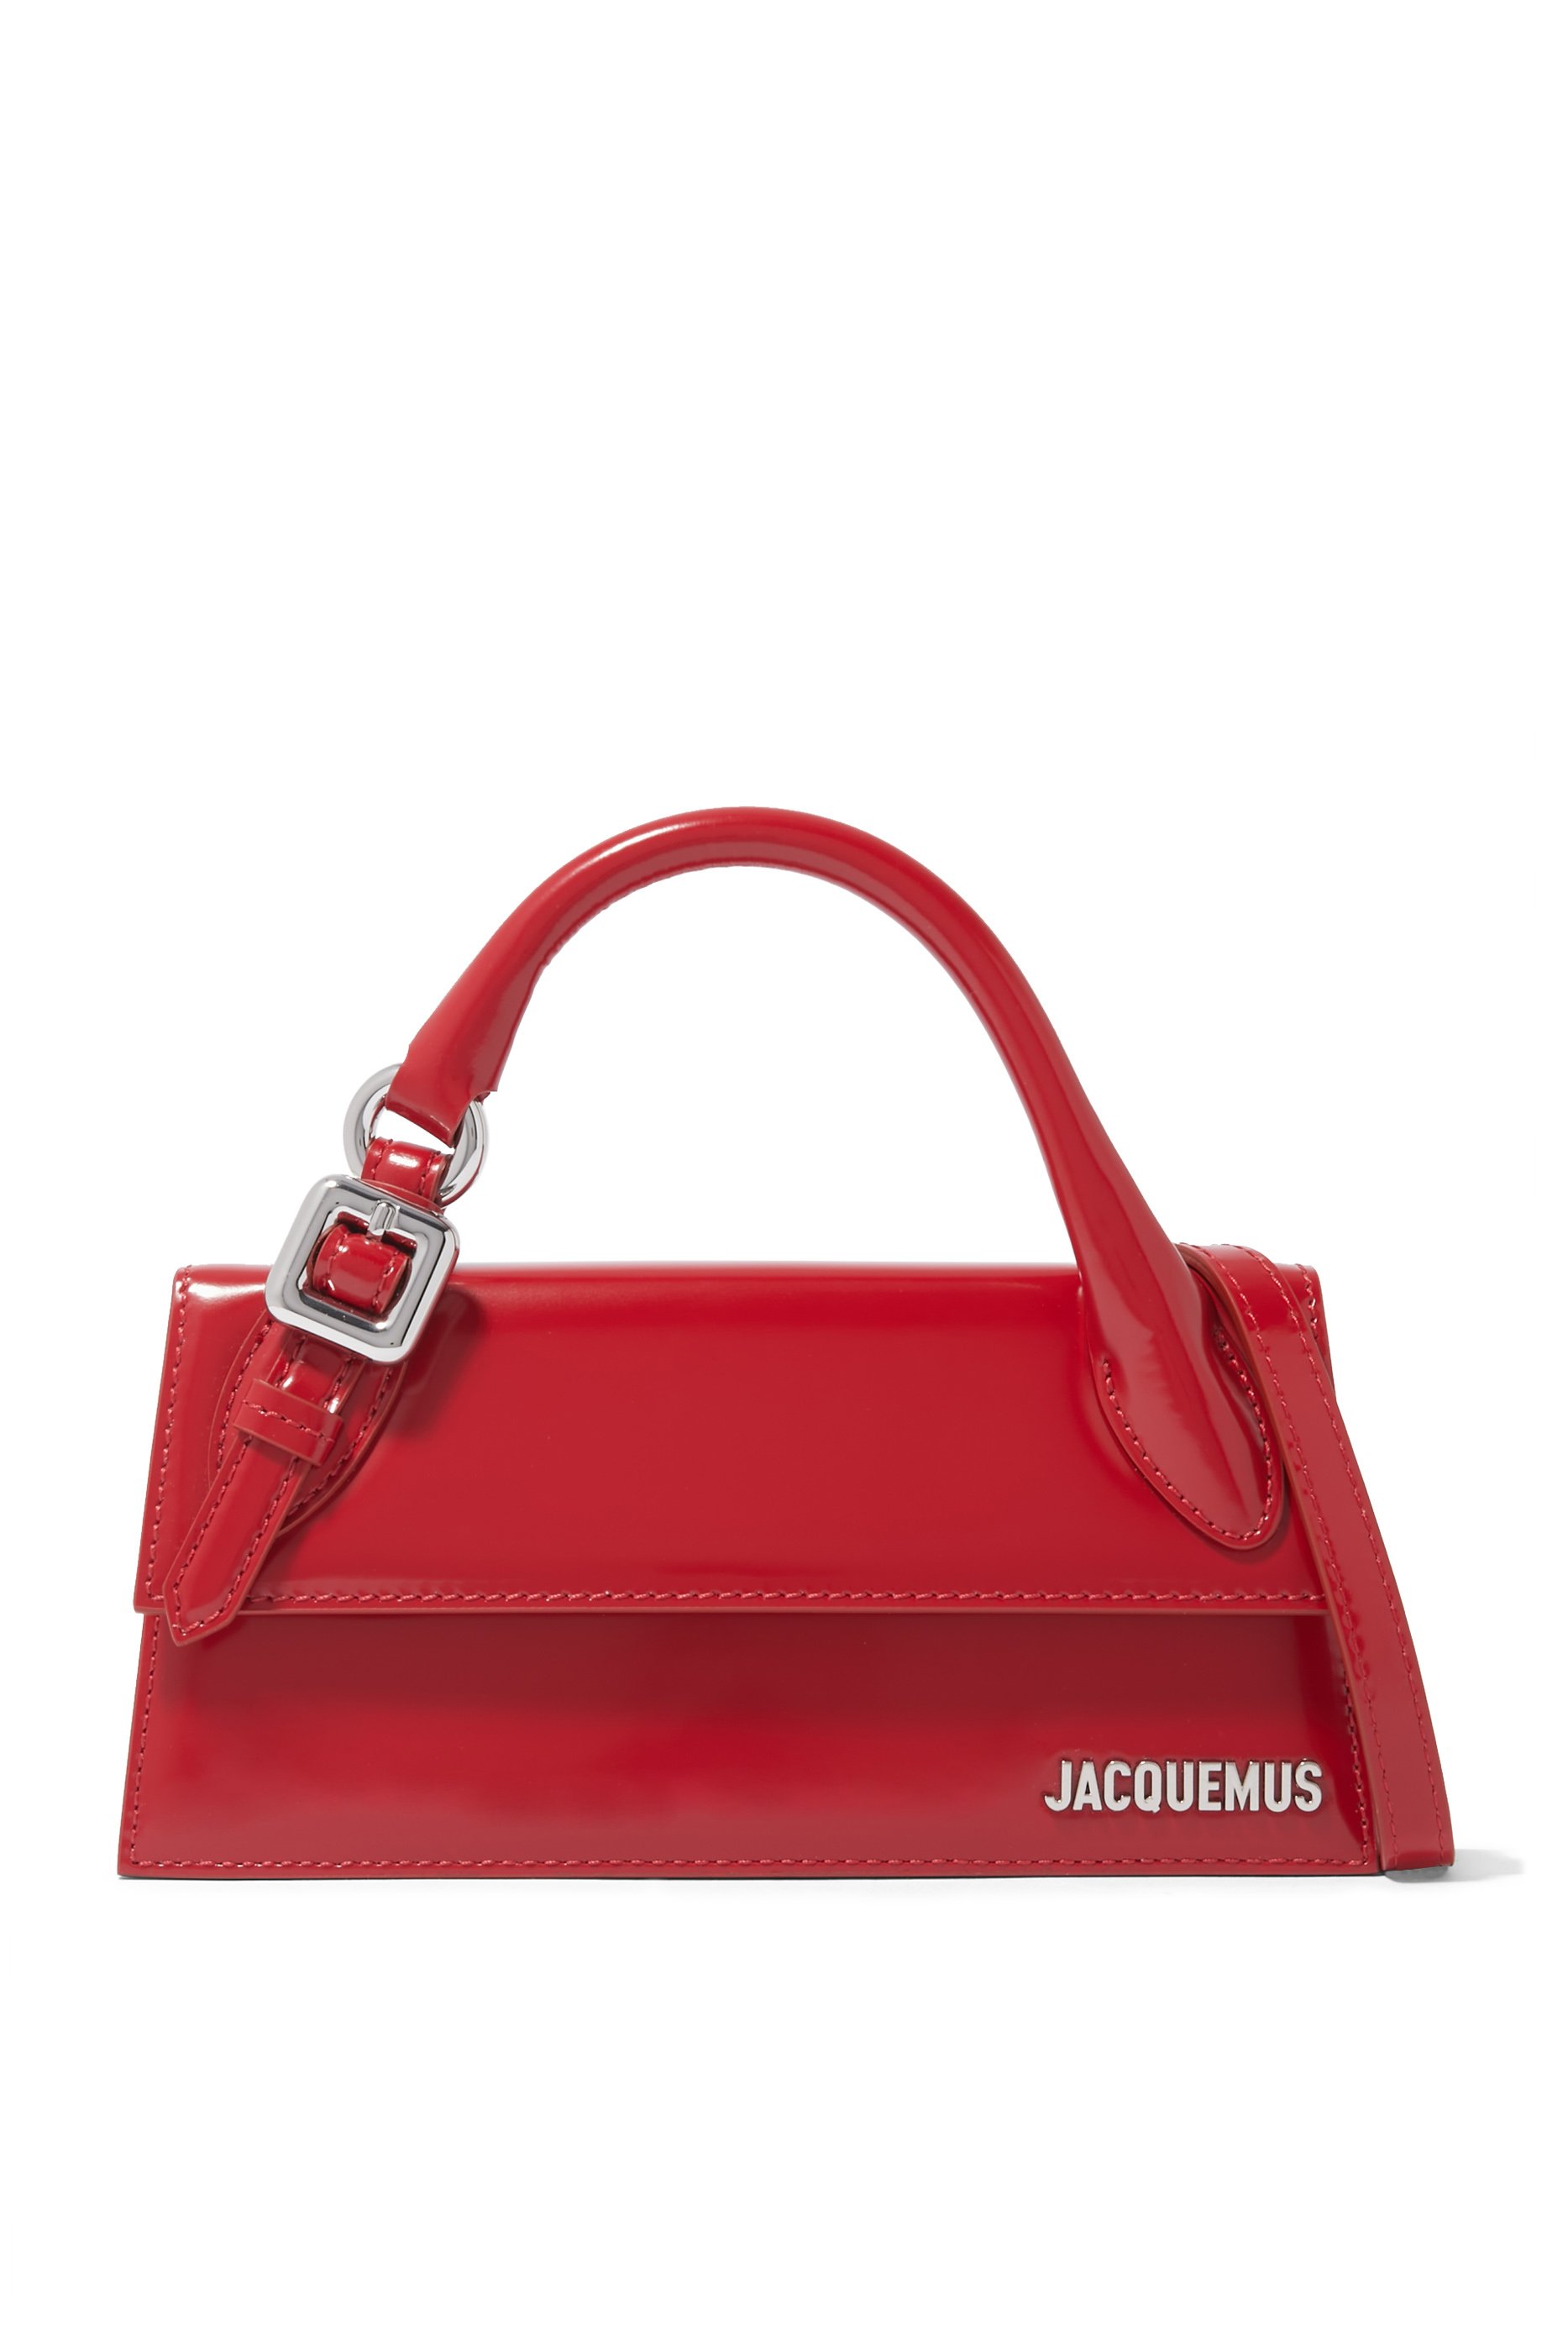 Buy Jacquemus Le Chiquito Long Boucle Bag for Womens | Bloomingdale's UAE